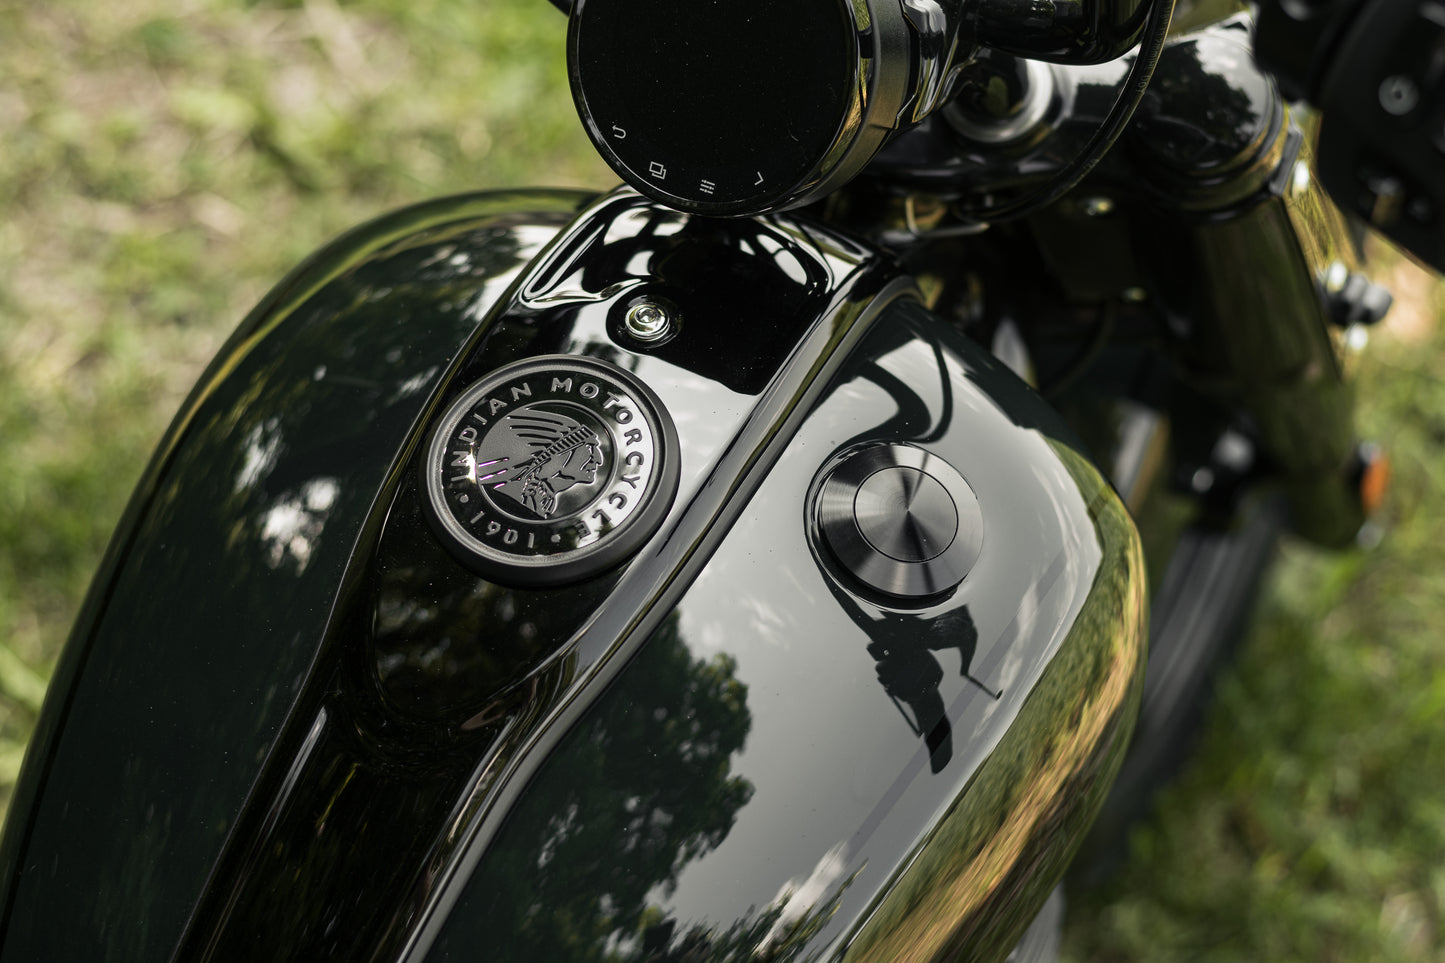 Zoomed Harley Davidson motorcycle with Killer Custom flush mount pop-up gas cap from above with blurred grass in the background